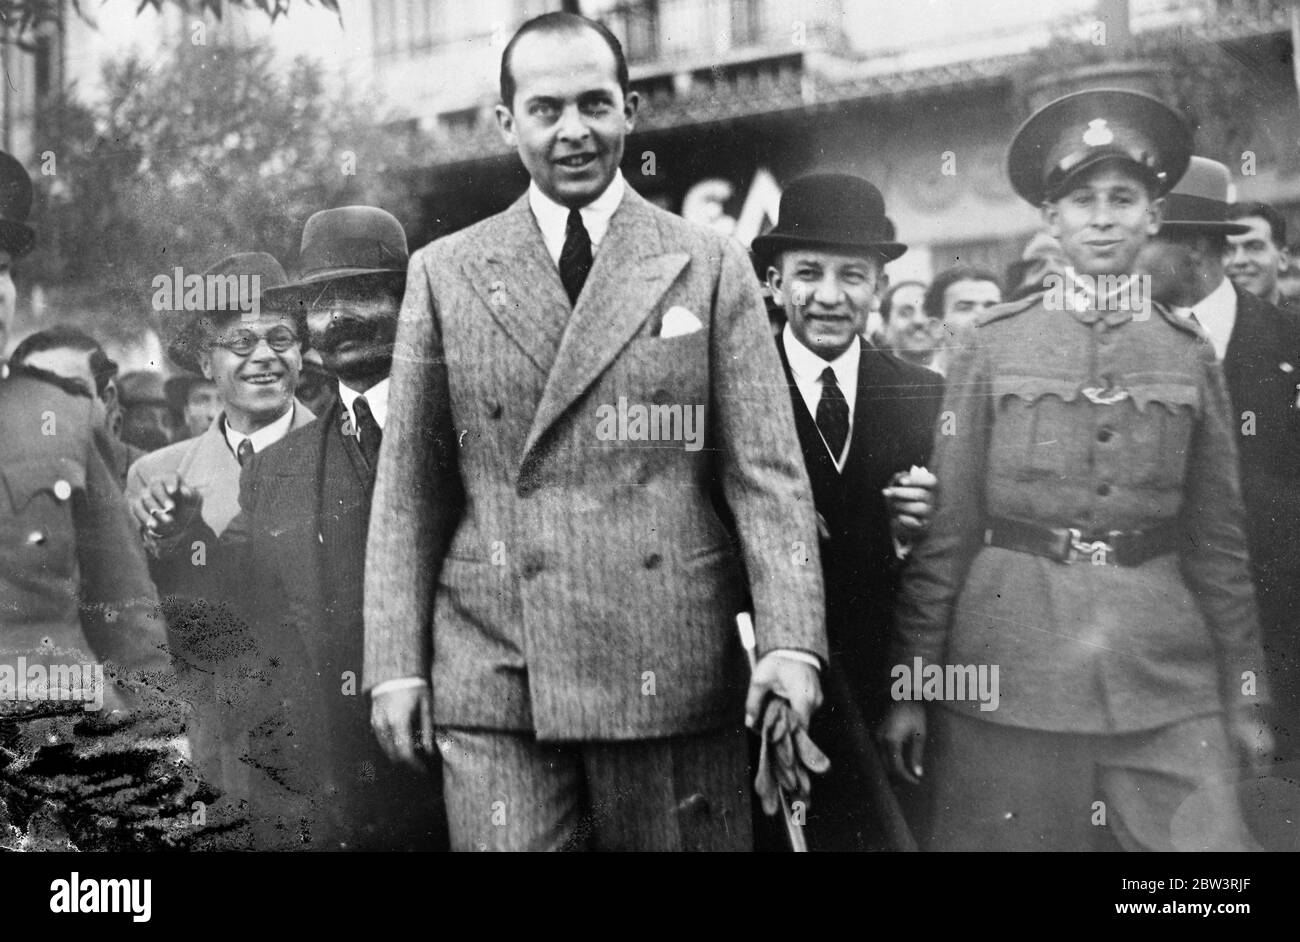 Greek Crown prince appears in Athens streets for first time since restoration of Monarch . Crown Prince Paul of Greece , brother of King George , was surrounded by enthusiastics citizens when he made his first appearance in the streets of Athens since the restoration of the monarch . Photo shows , Crown Prince Paul out walking in Athens for the first time since the restoration of the monarchy . 1935 Stock Photo